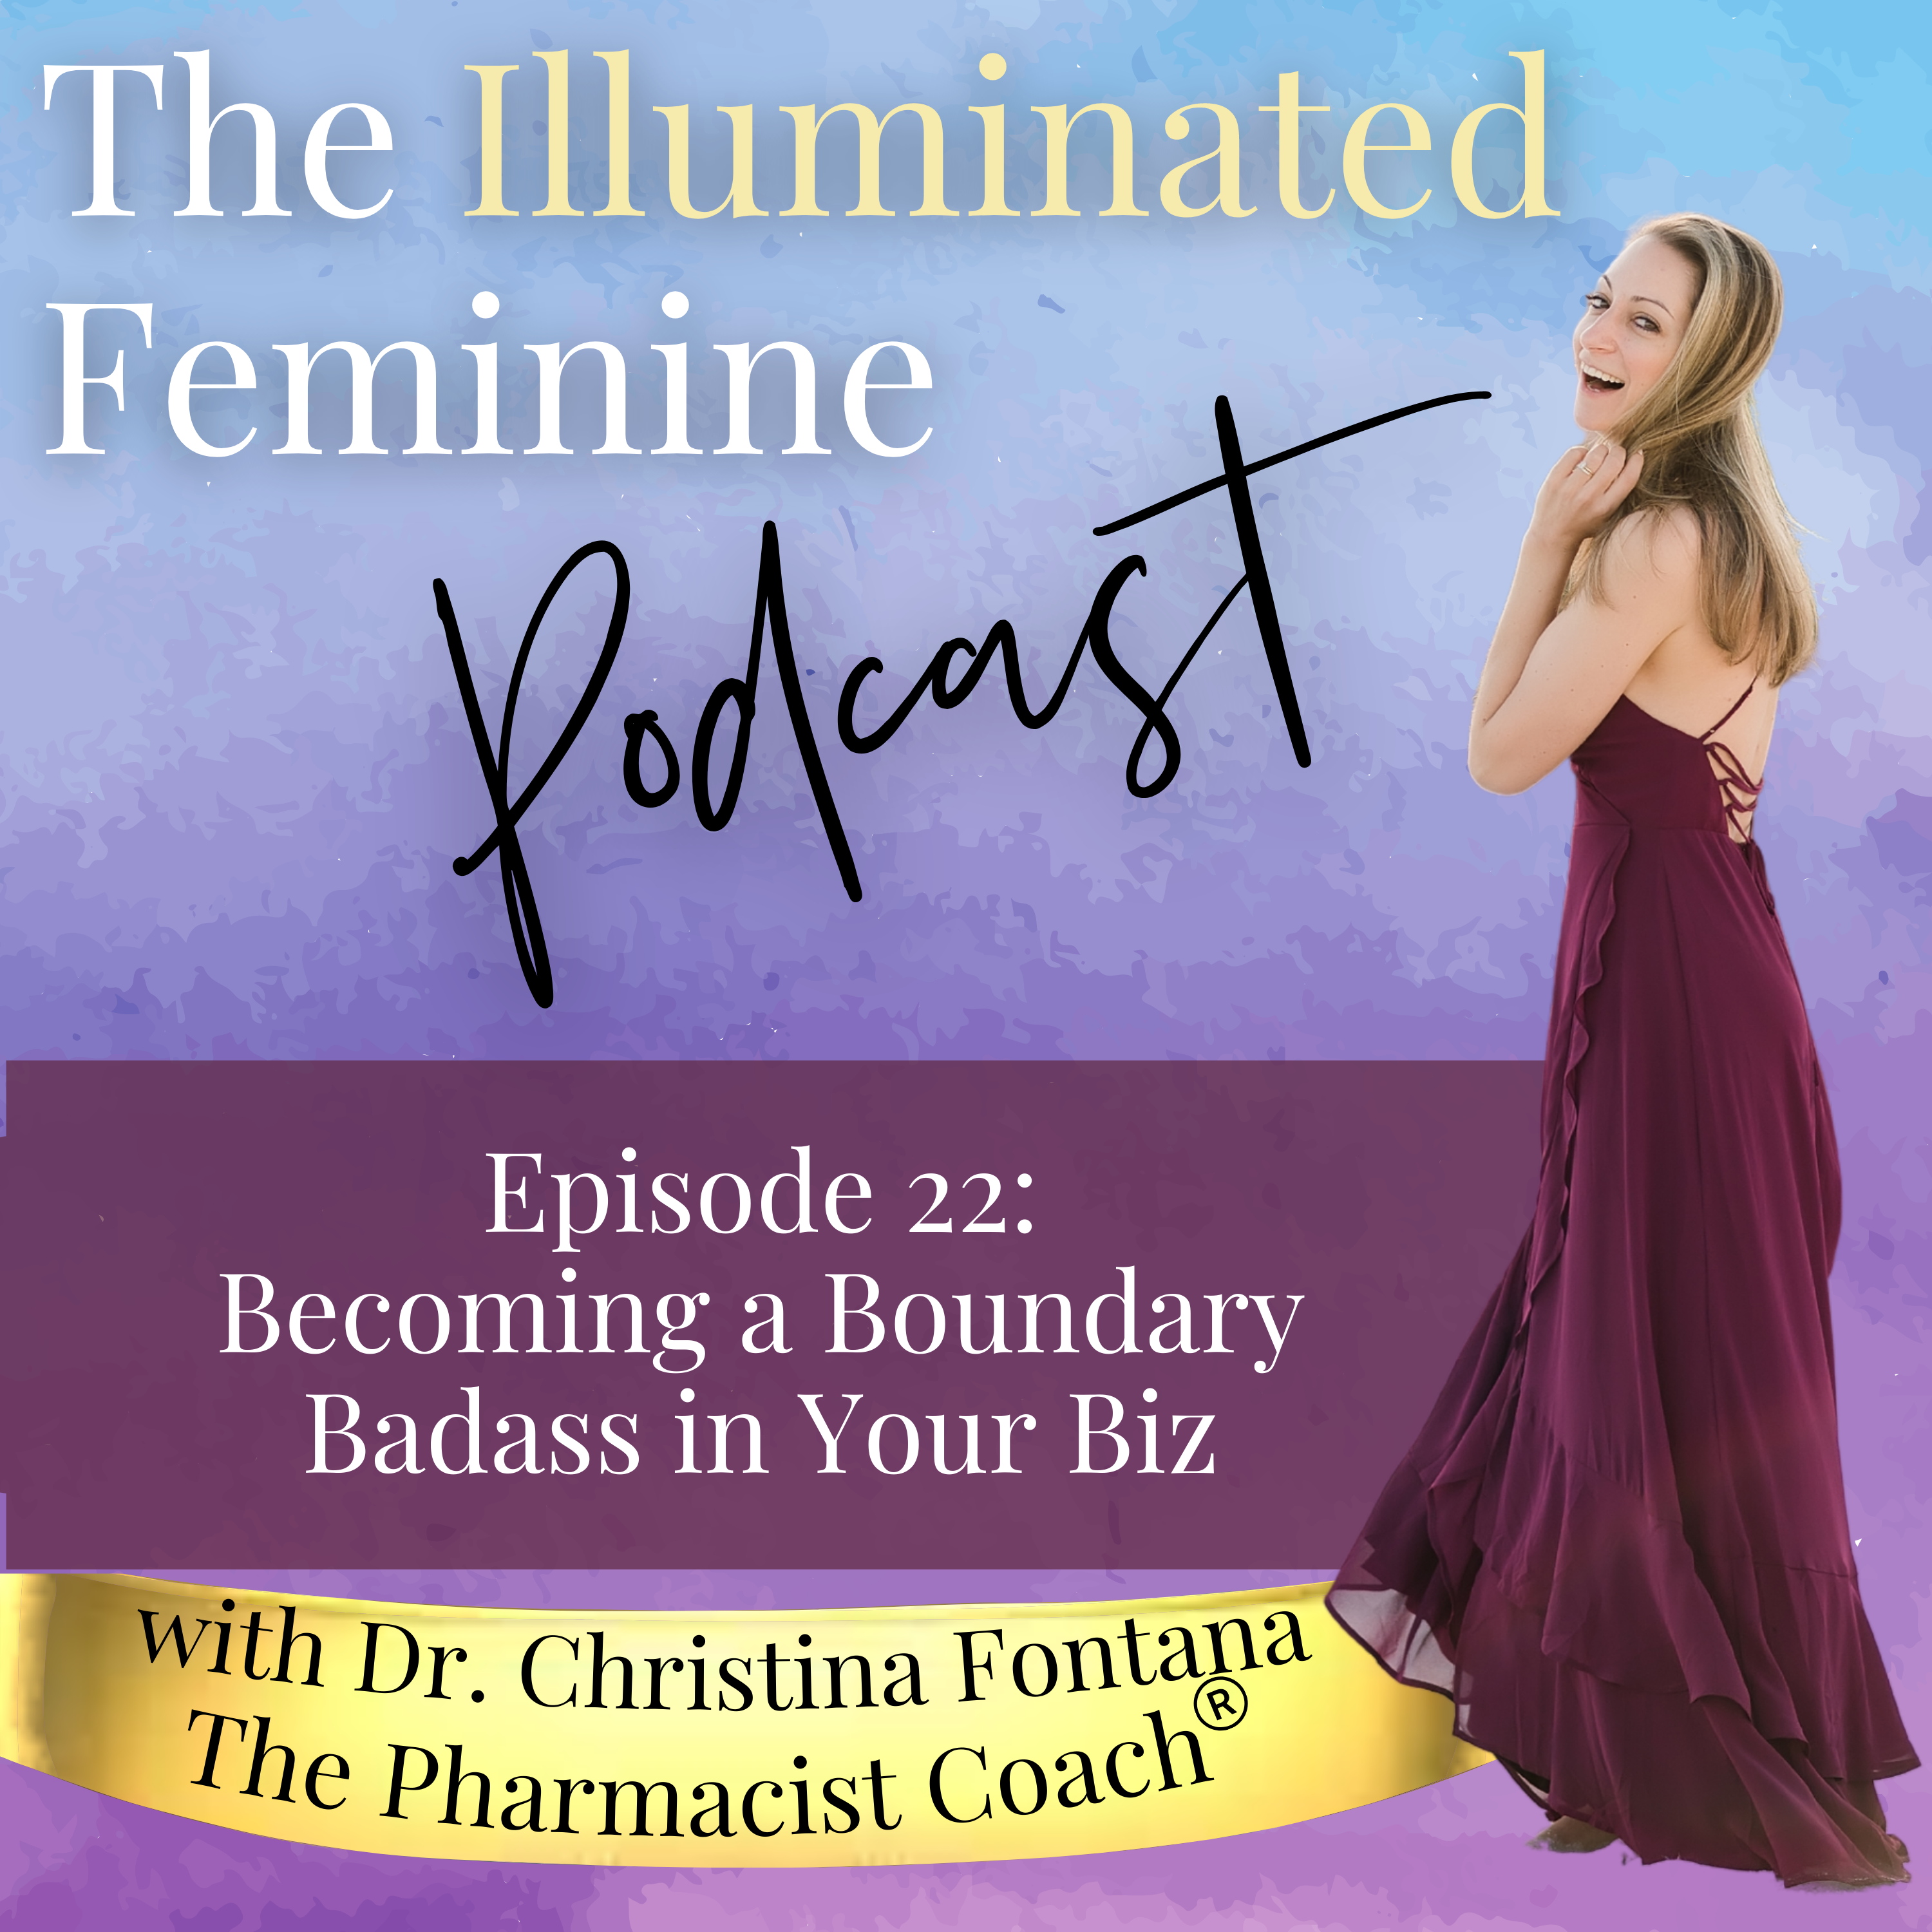 Featured image for “Illuminated Feminine Podcast Episode 22. Becoming a Boundary Badass in Your Biz”